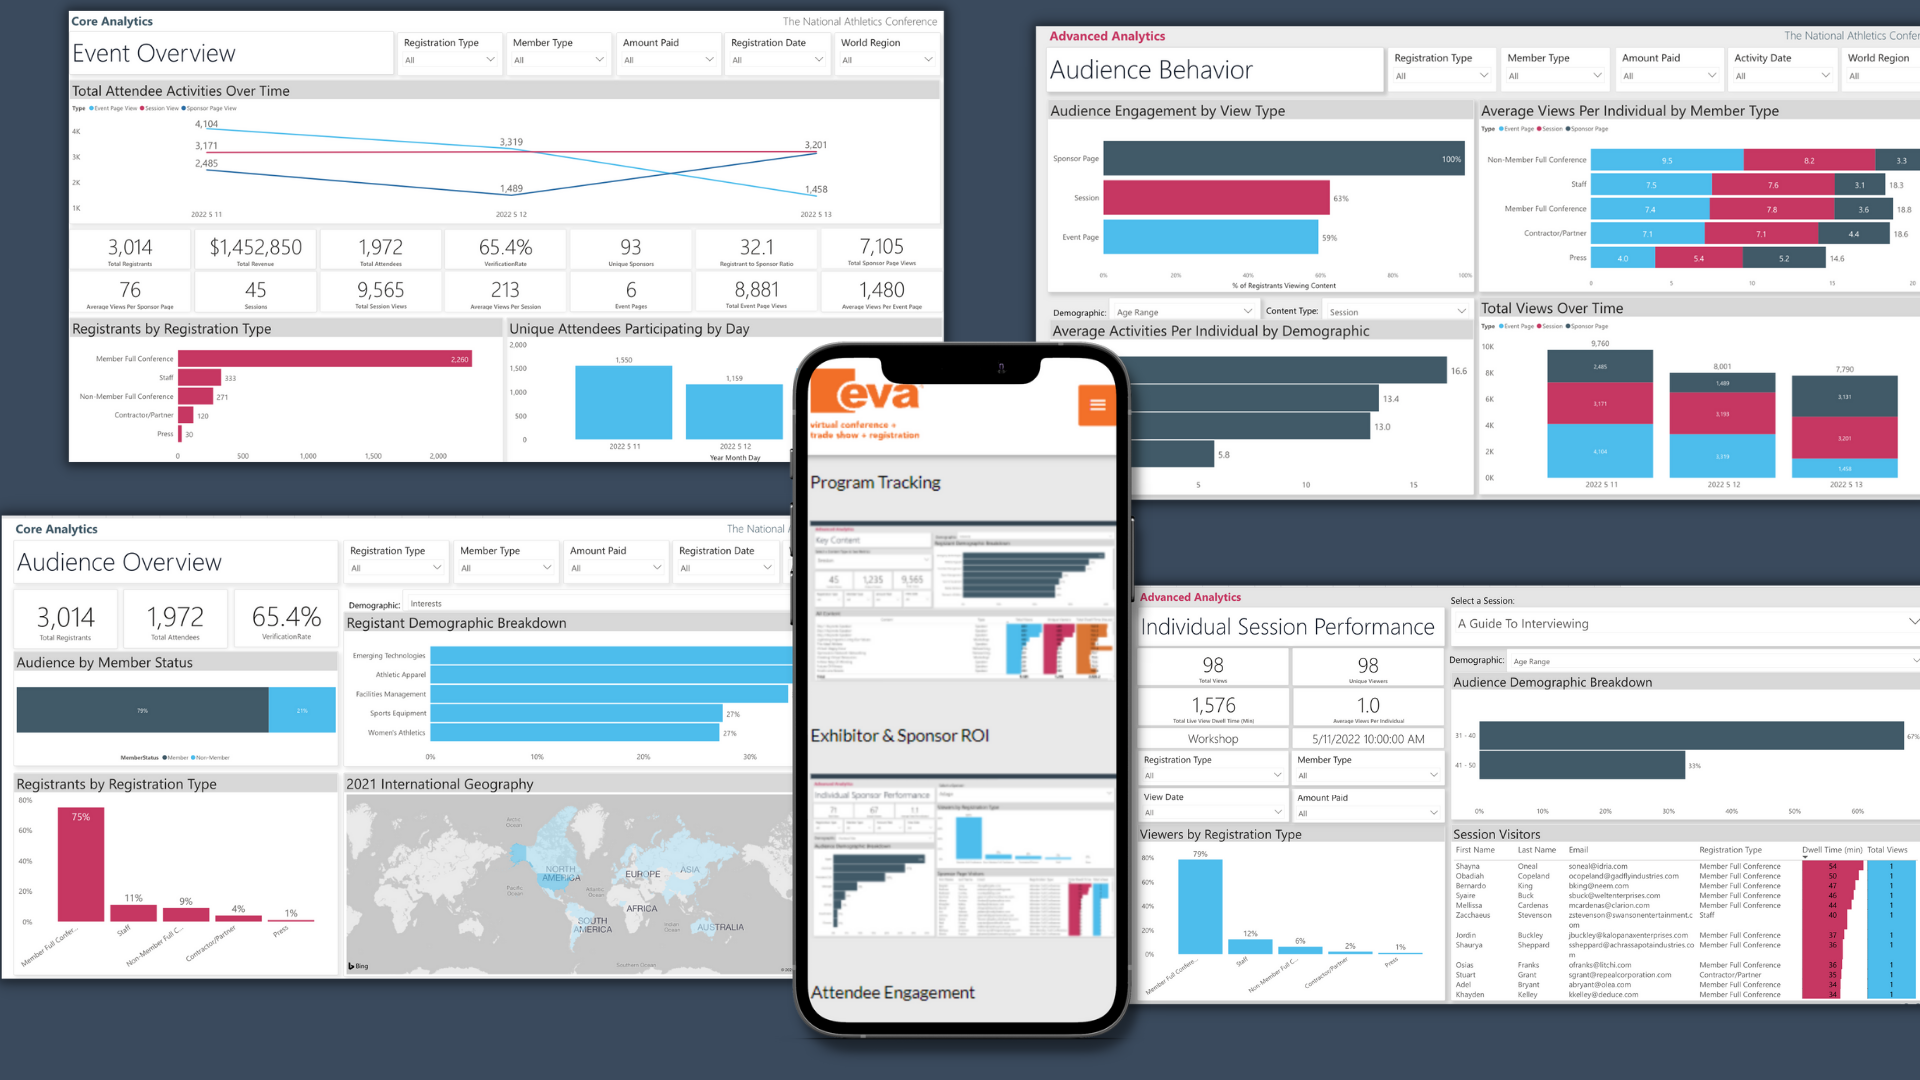 Event insights at your fingertips. Track session performances, audience engagement, sponsor/exhibitor ROI, and more using EVA's built-in advanced event analytics. Deliver improved meeting experiences every time.